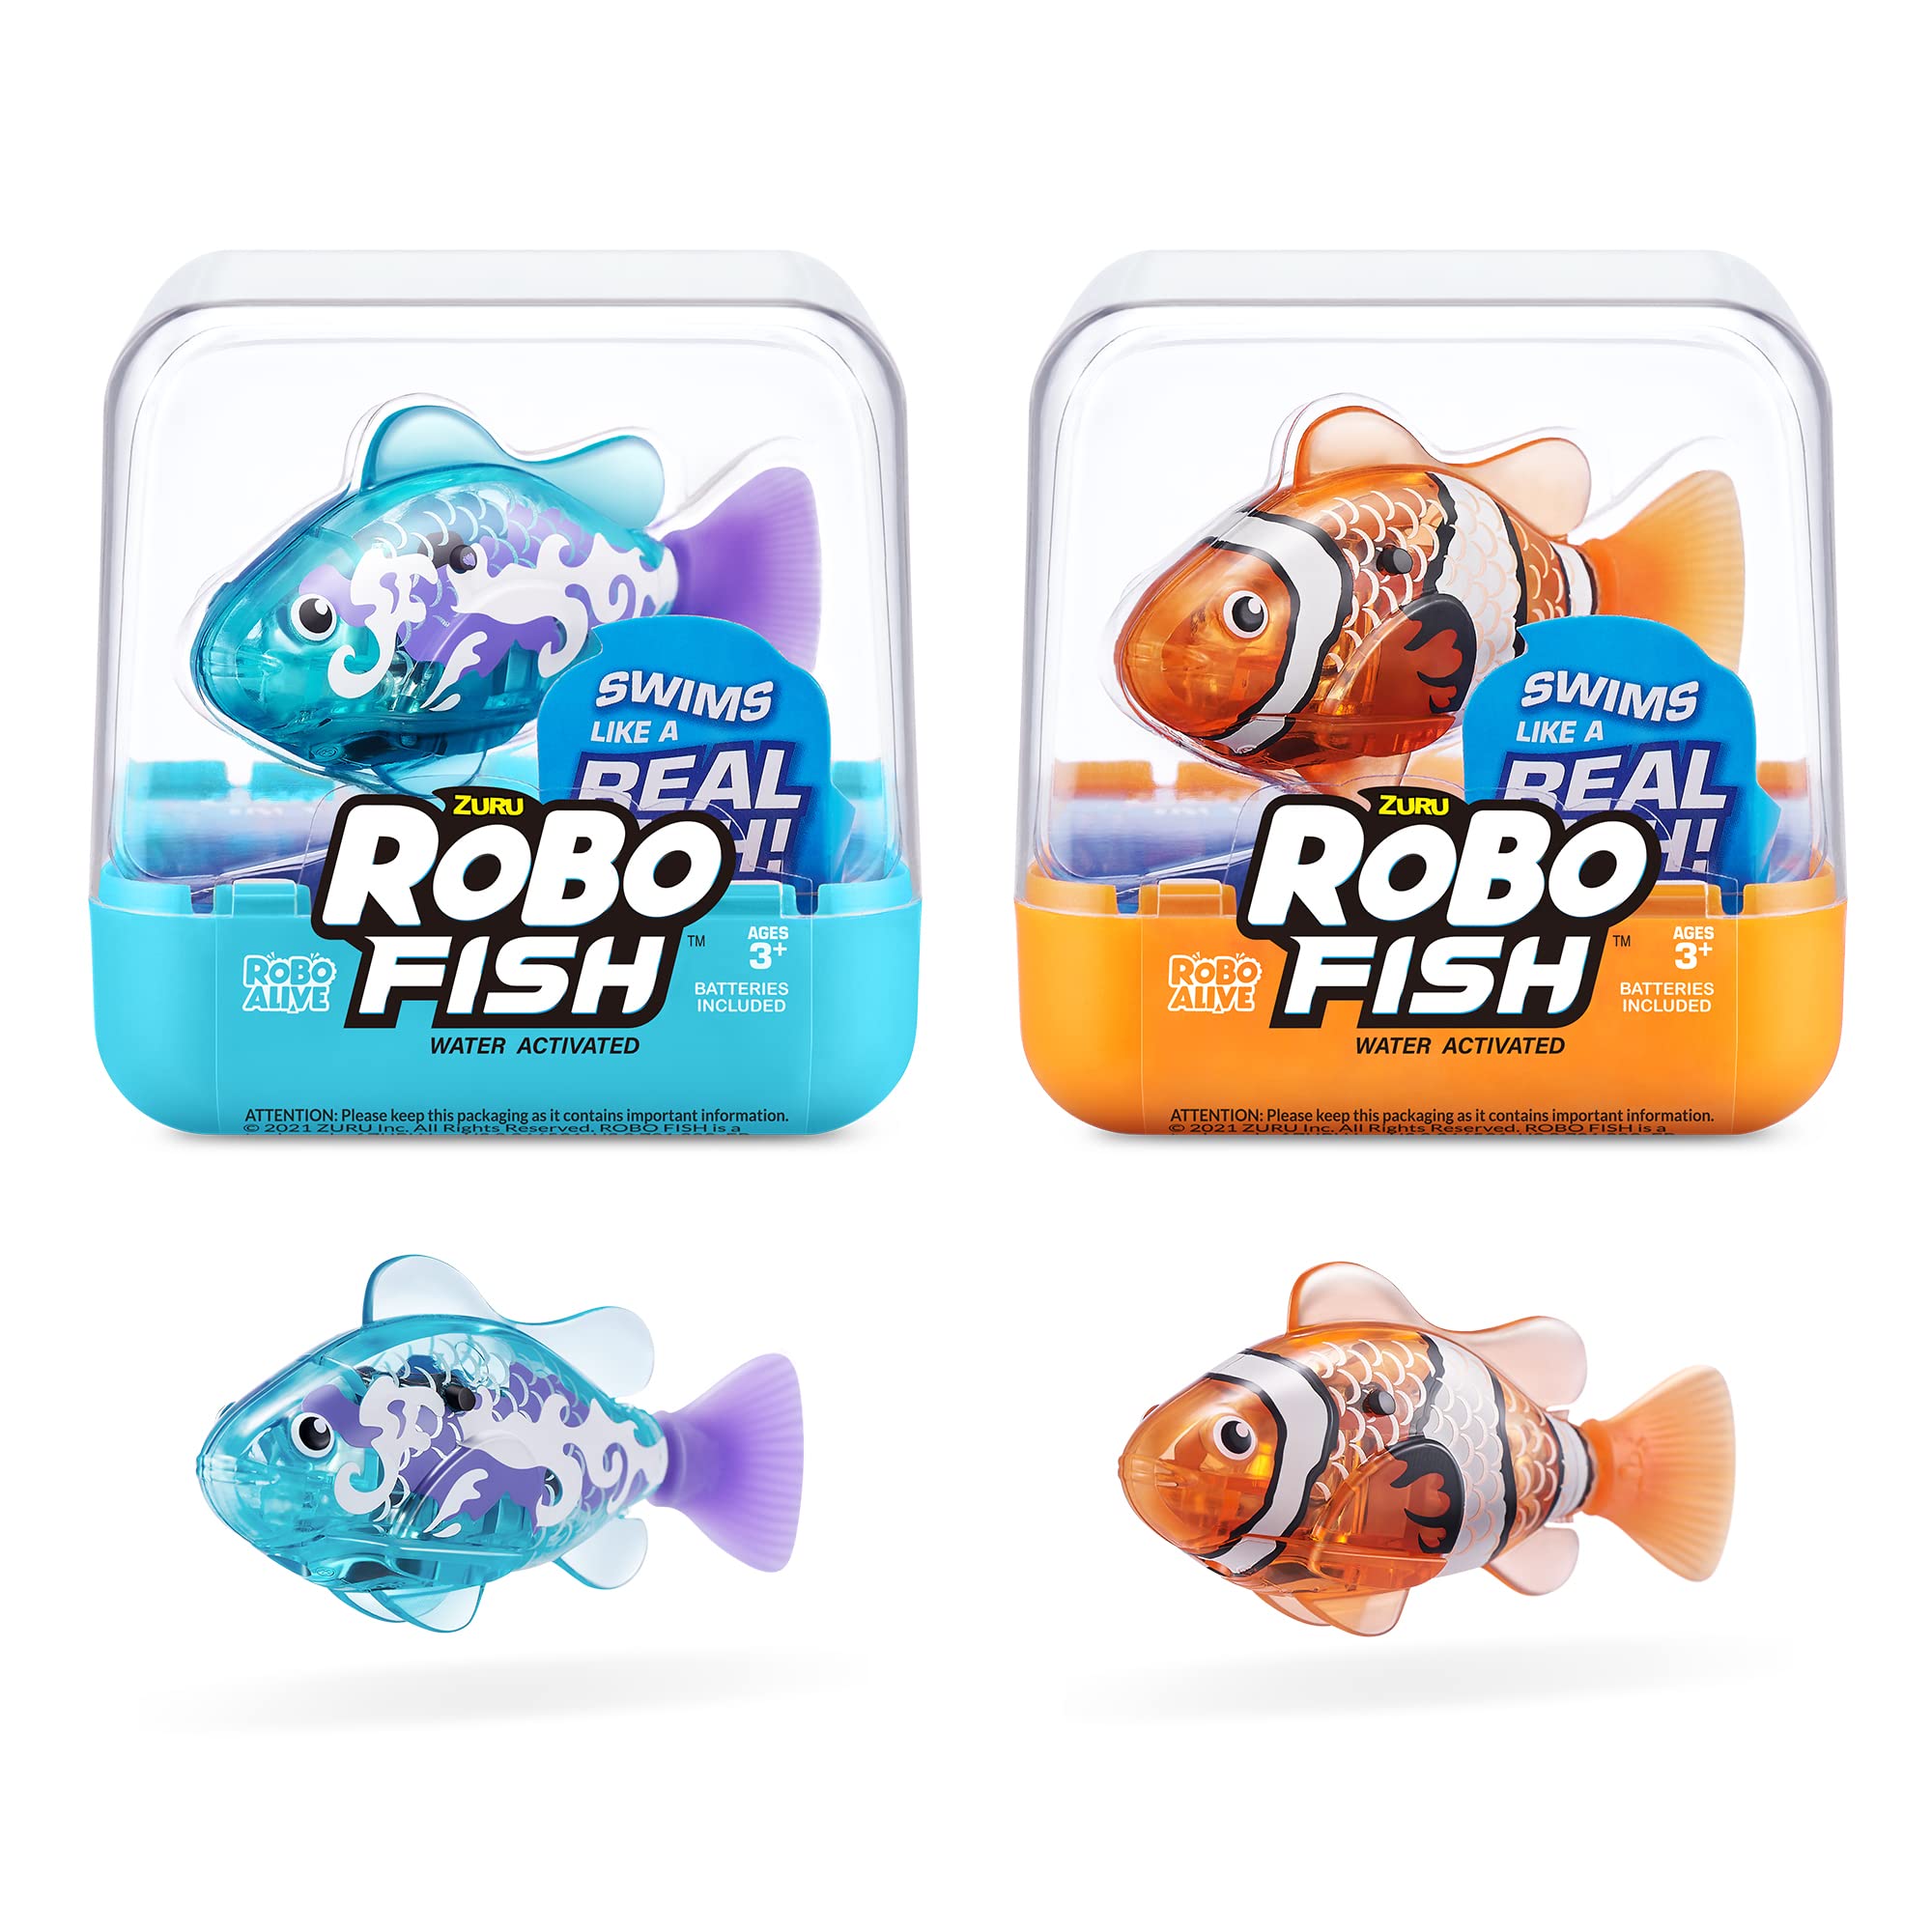 Robo Alive Robo Fish Robotic Swimming Fish (Teal + Orange) by ZURU Water Activated, Changes Color, Comes with Batteries, Amazon Exclusive (2 Pack) Series 3